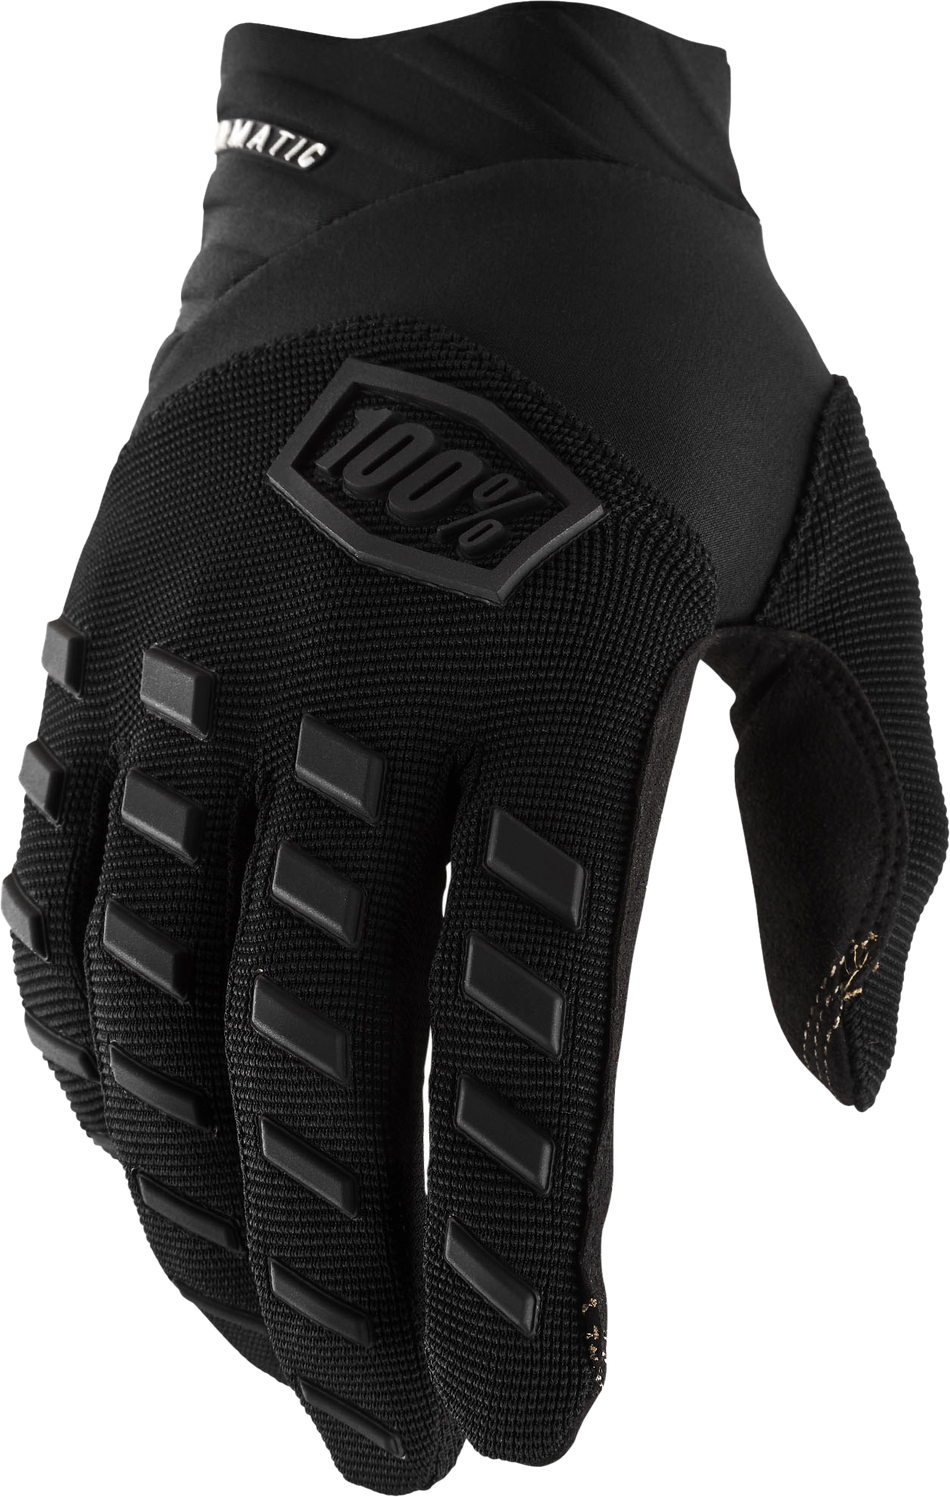 100% Airmatic Gloves Black/Charcoal Md 10000-00001